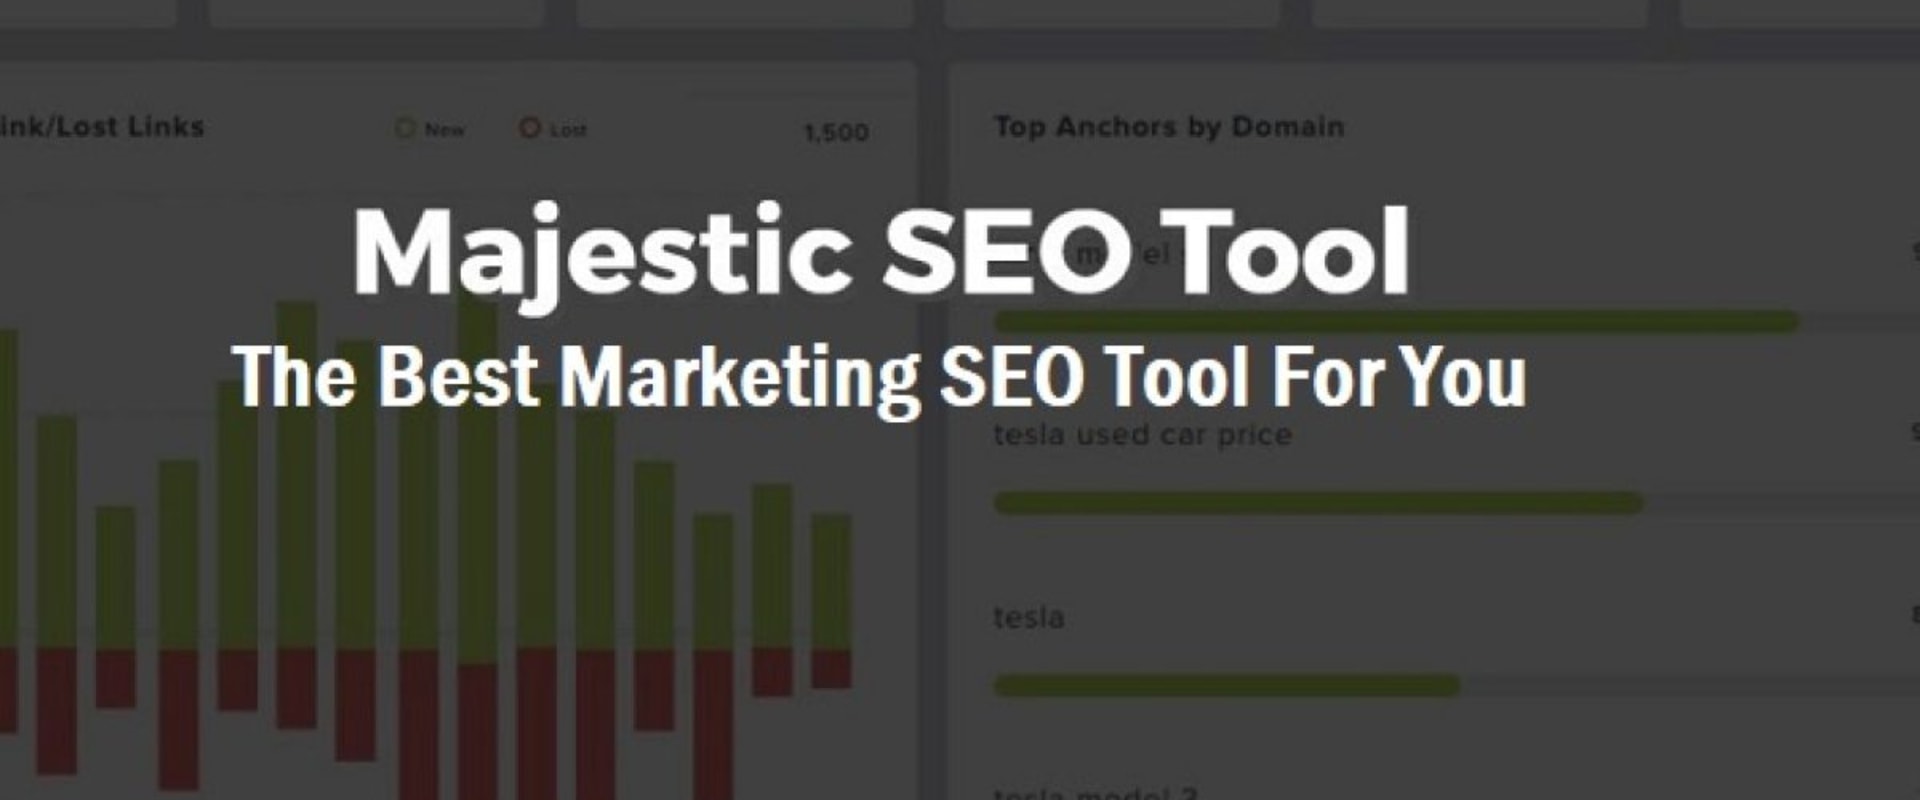 Is Majestic SEO a Useful Tool for SEO Professionals?